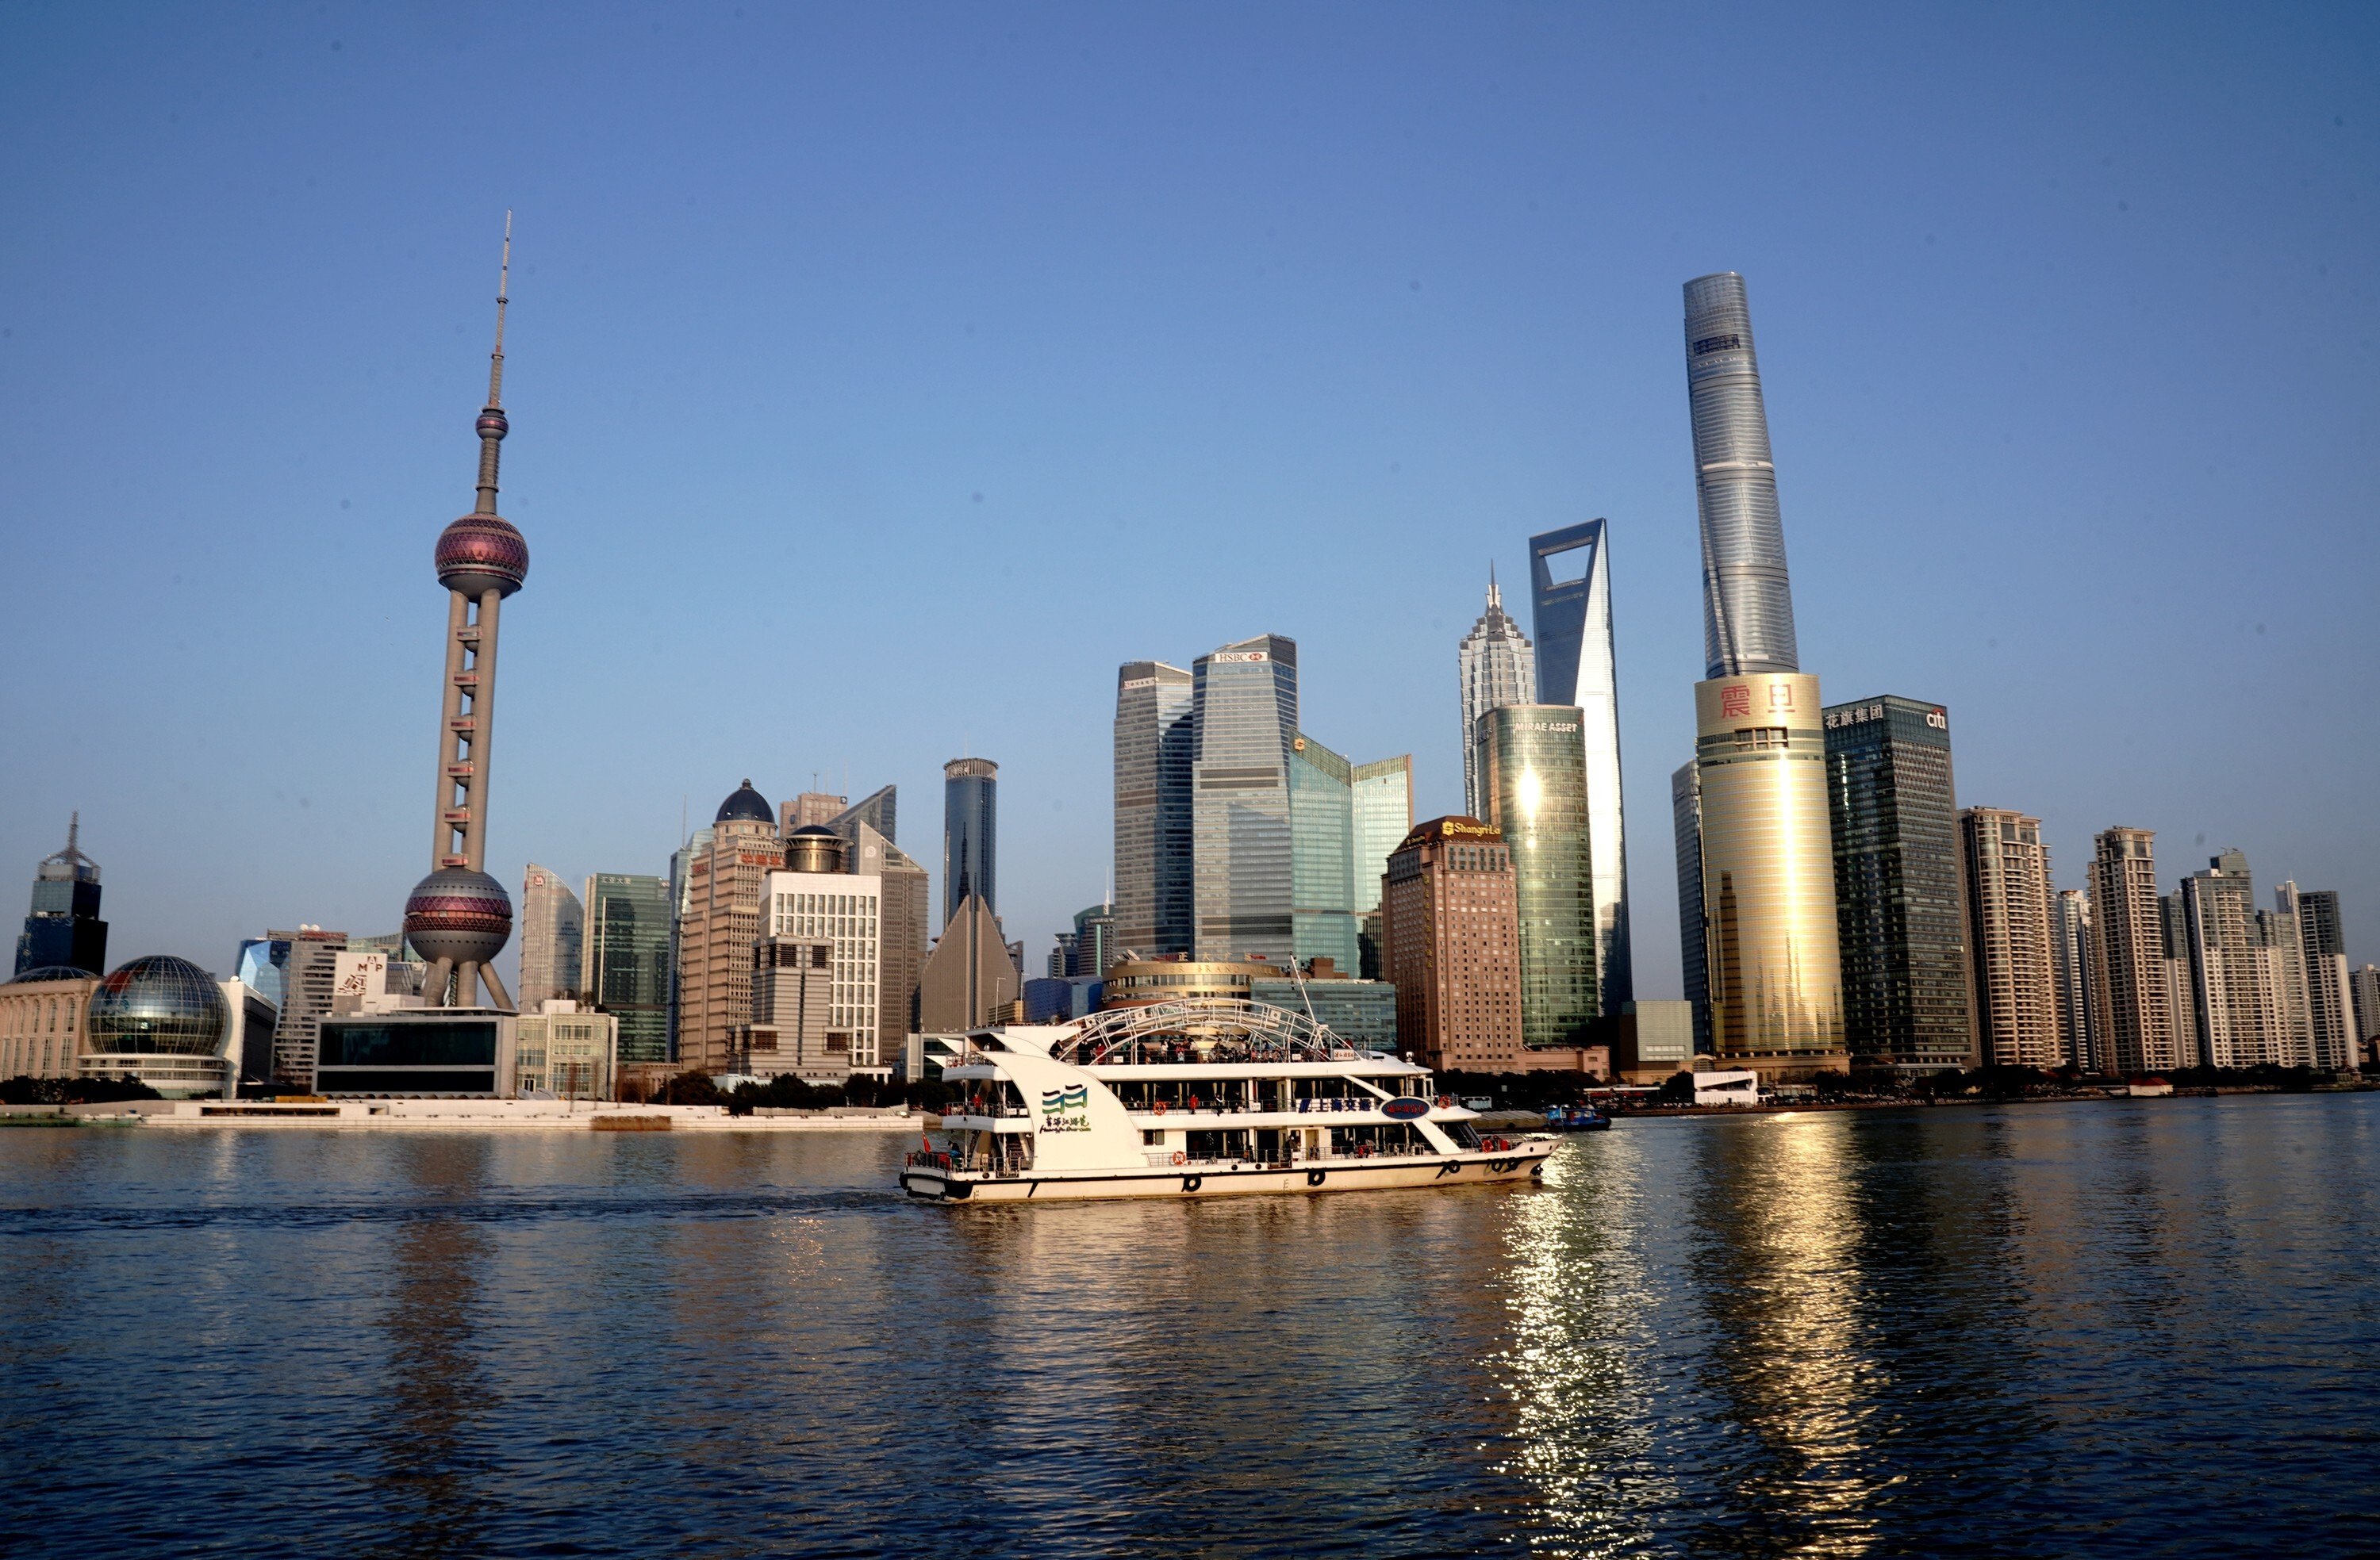 A view of the Lujiazui financial district in the Pudong area of Shanghai from the Huangpu river that cuts through the city. Photo: Xinhua